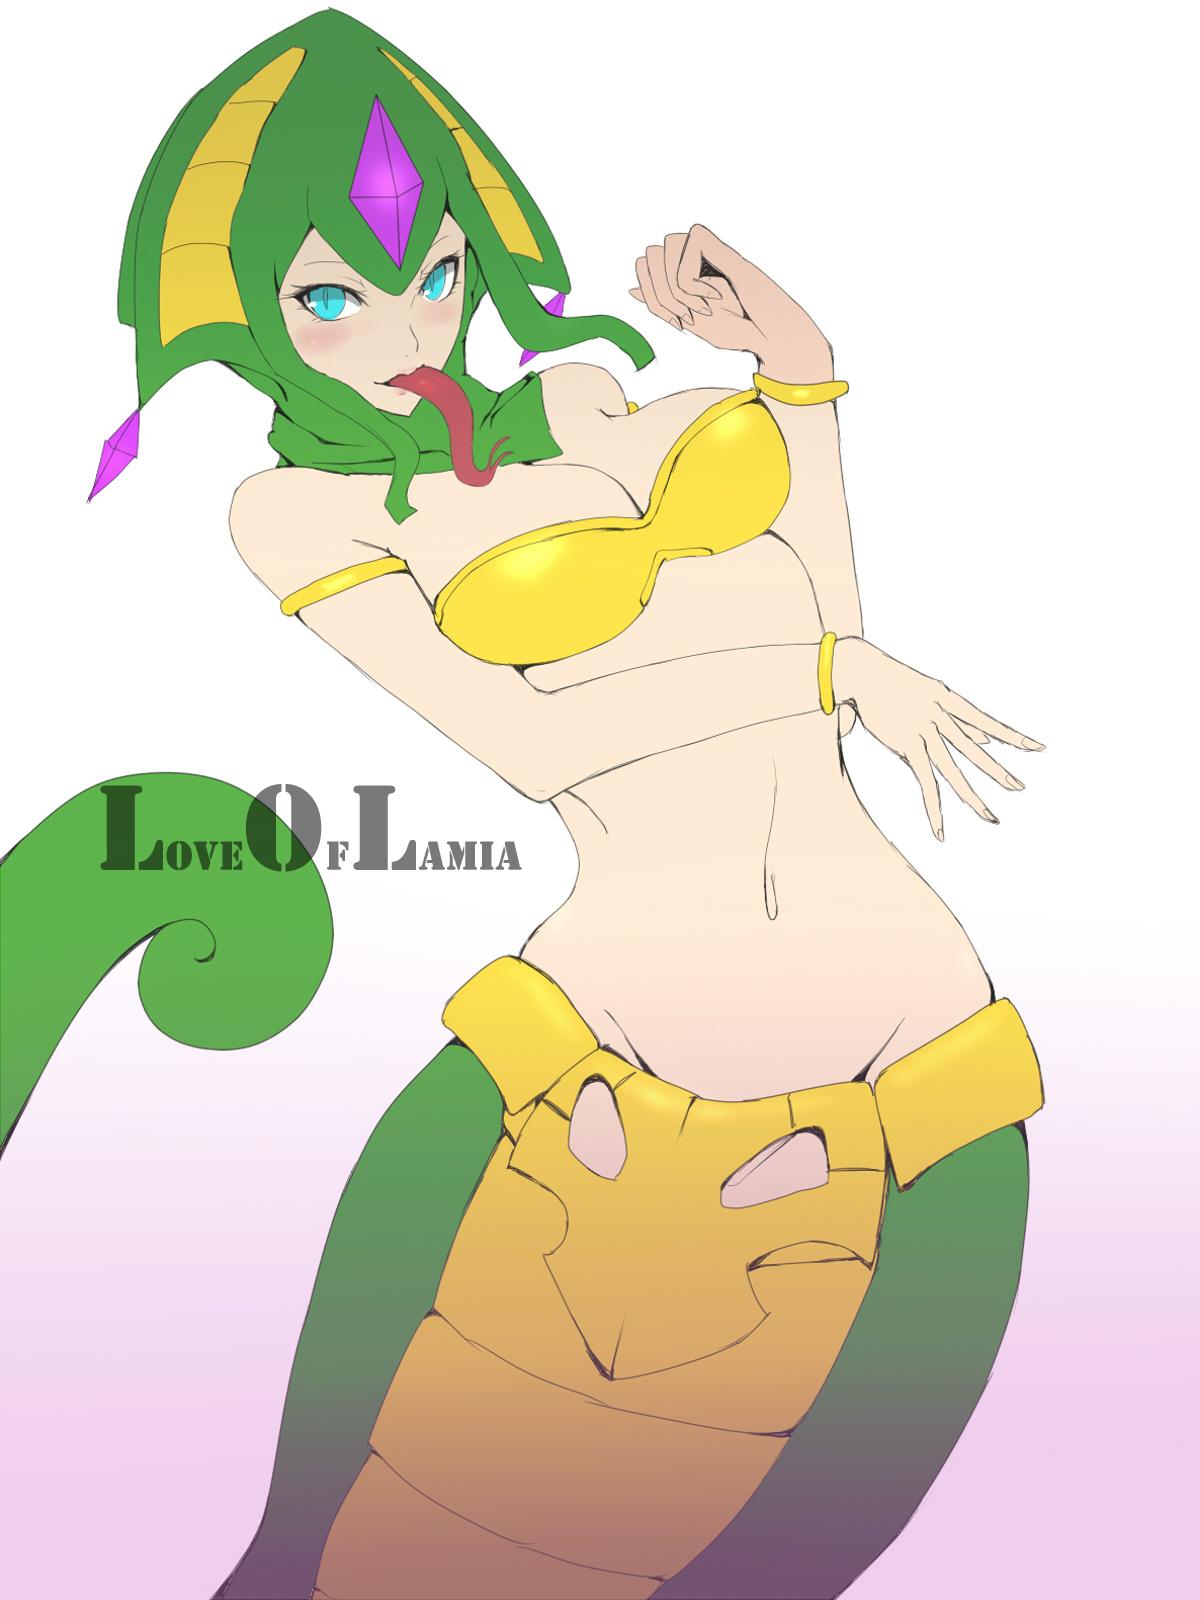 Cuckold Love Of Lamia - League of legends Matures - Page 1